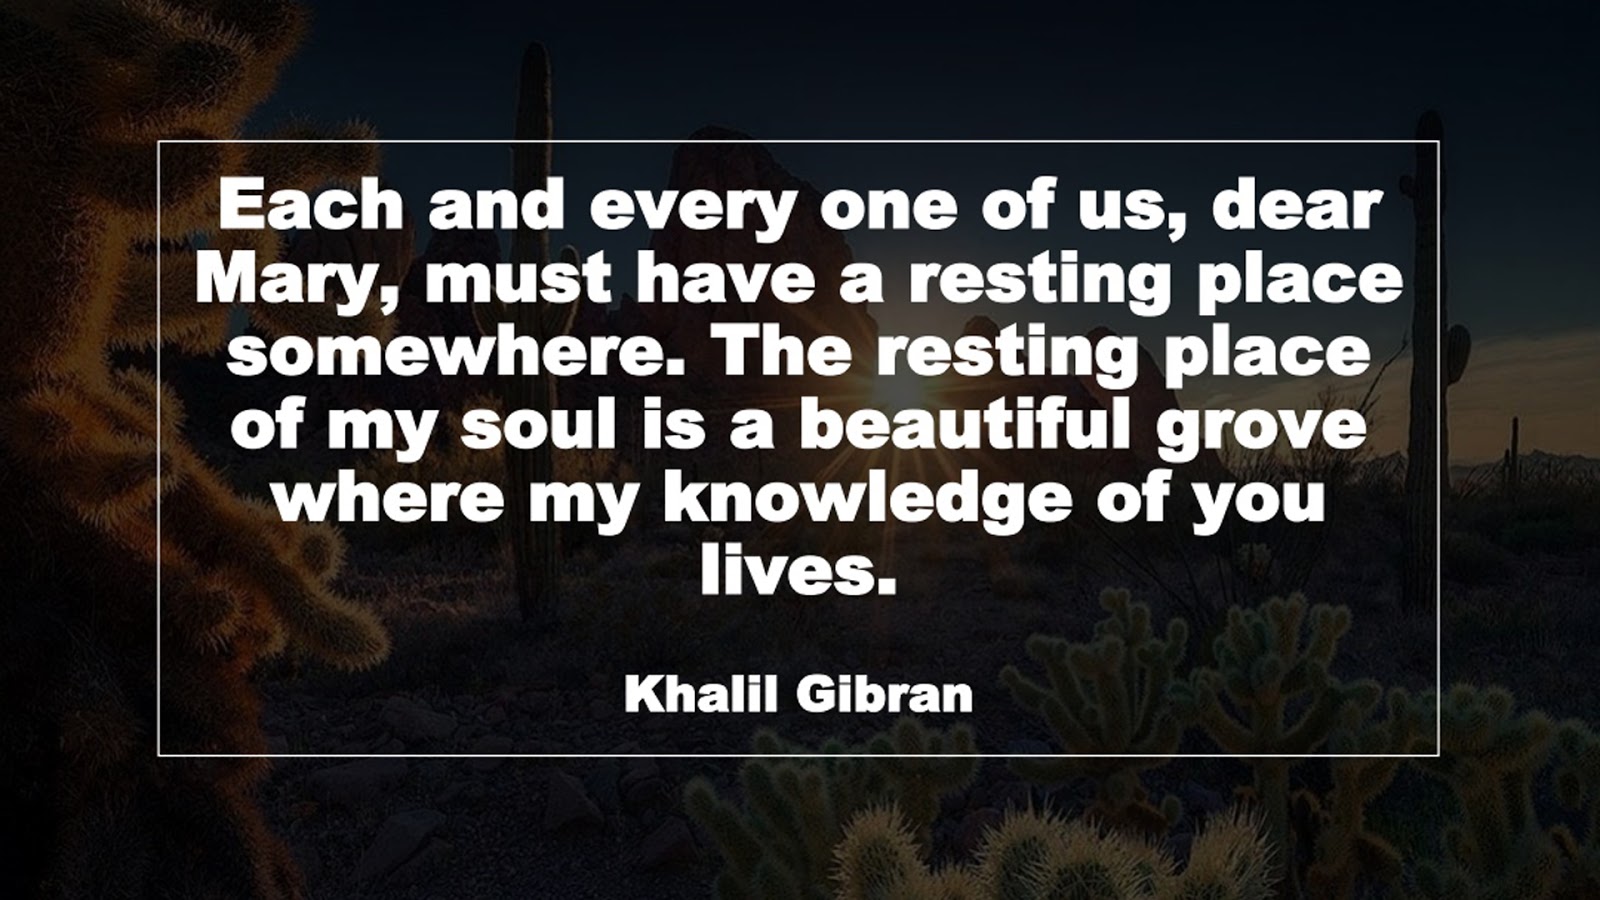 Each and every one of us, dear Mary, must have a resting place somewhere. The resting place of my soul is a beautiful grove where my knowledge of you lives. (Khalil Gibran)